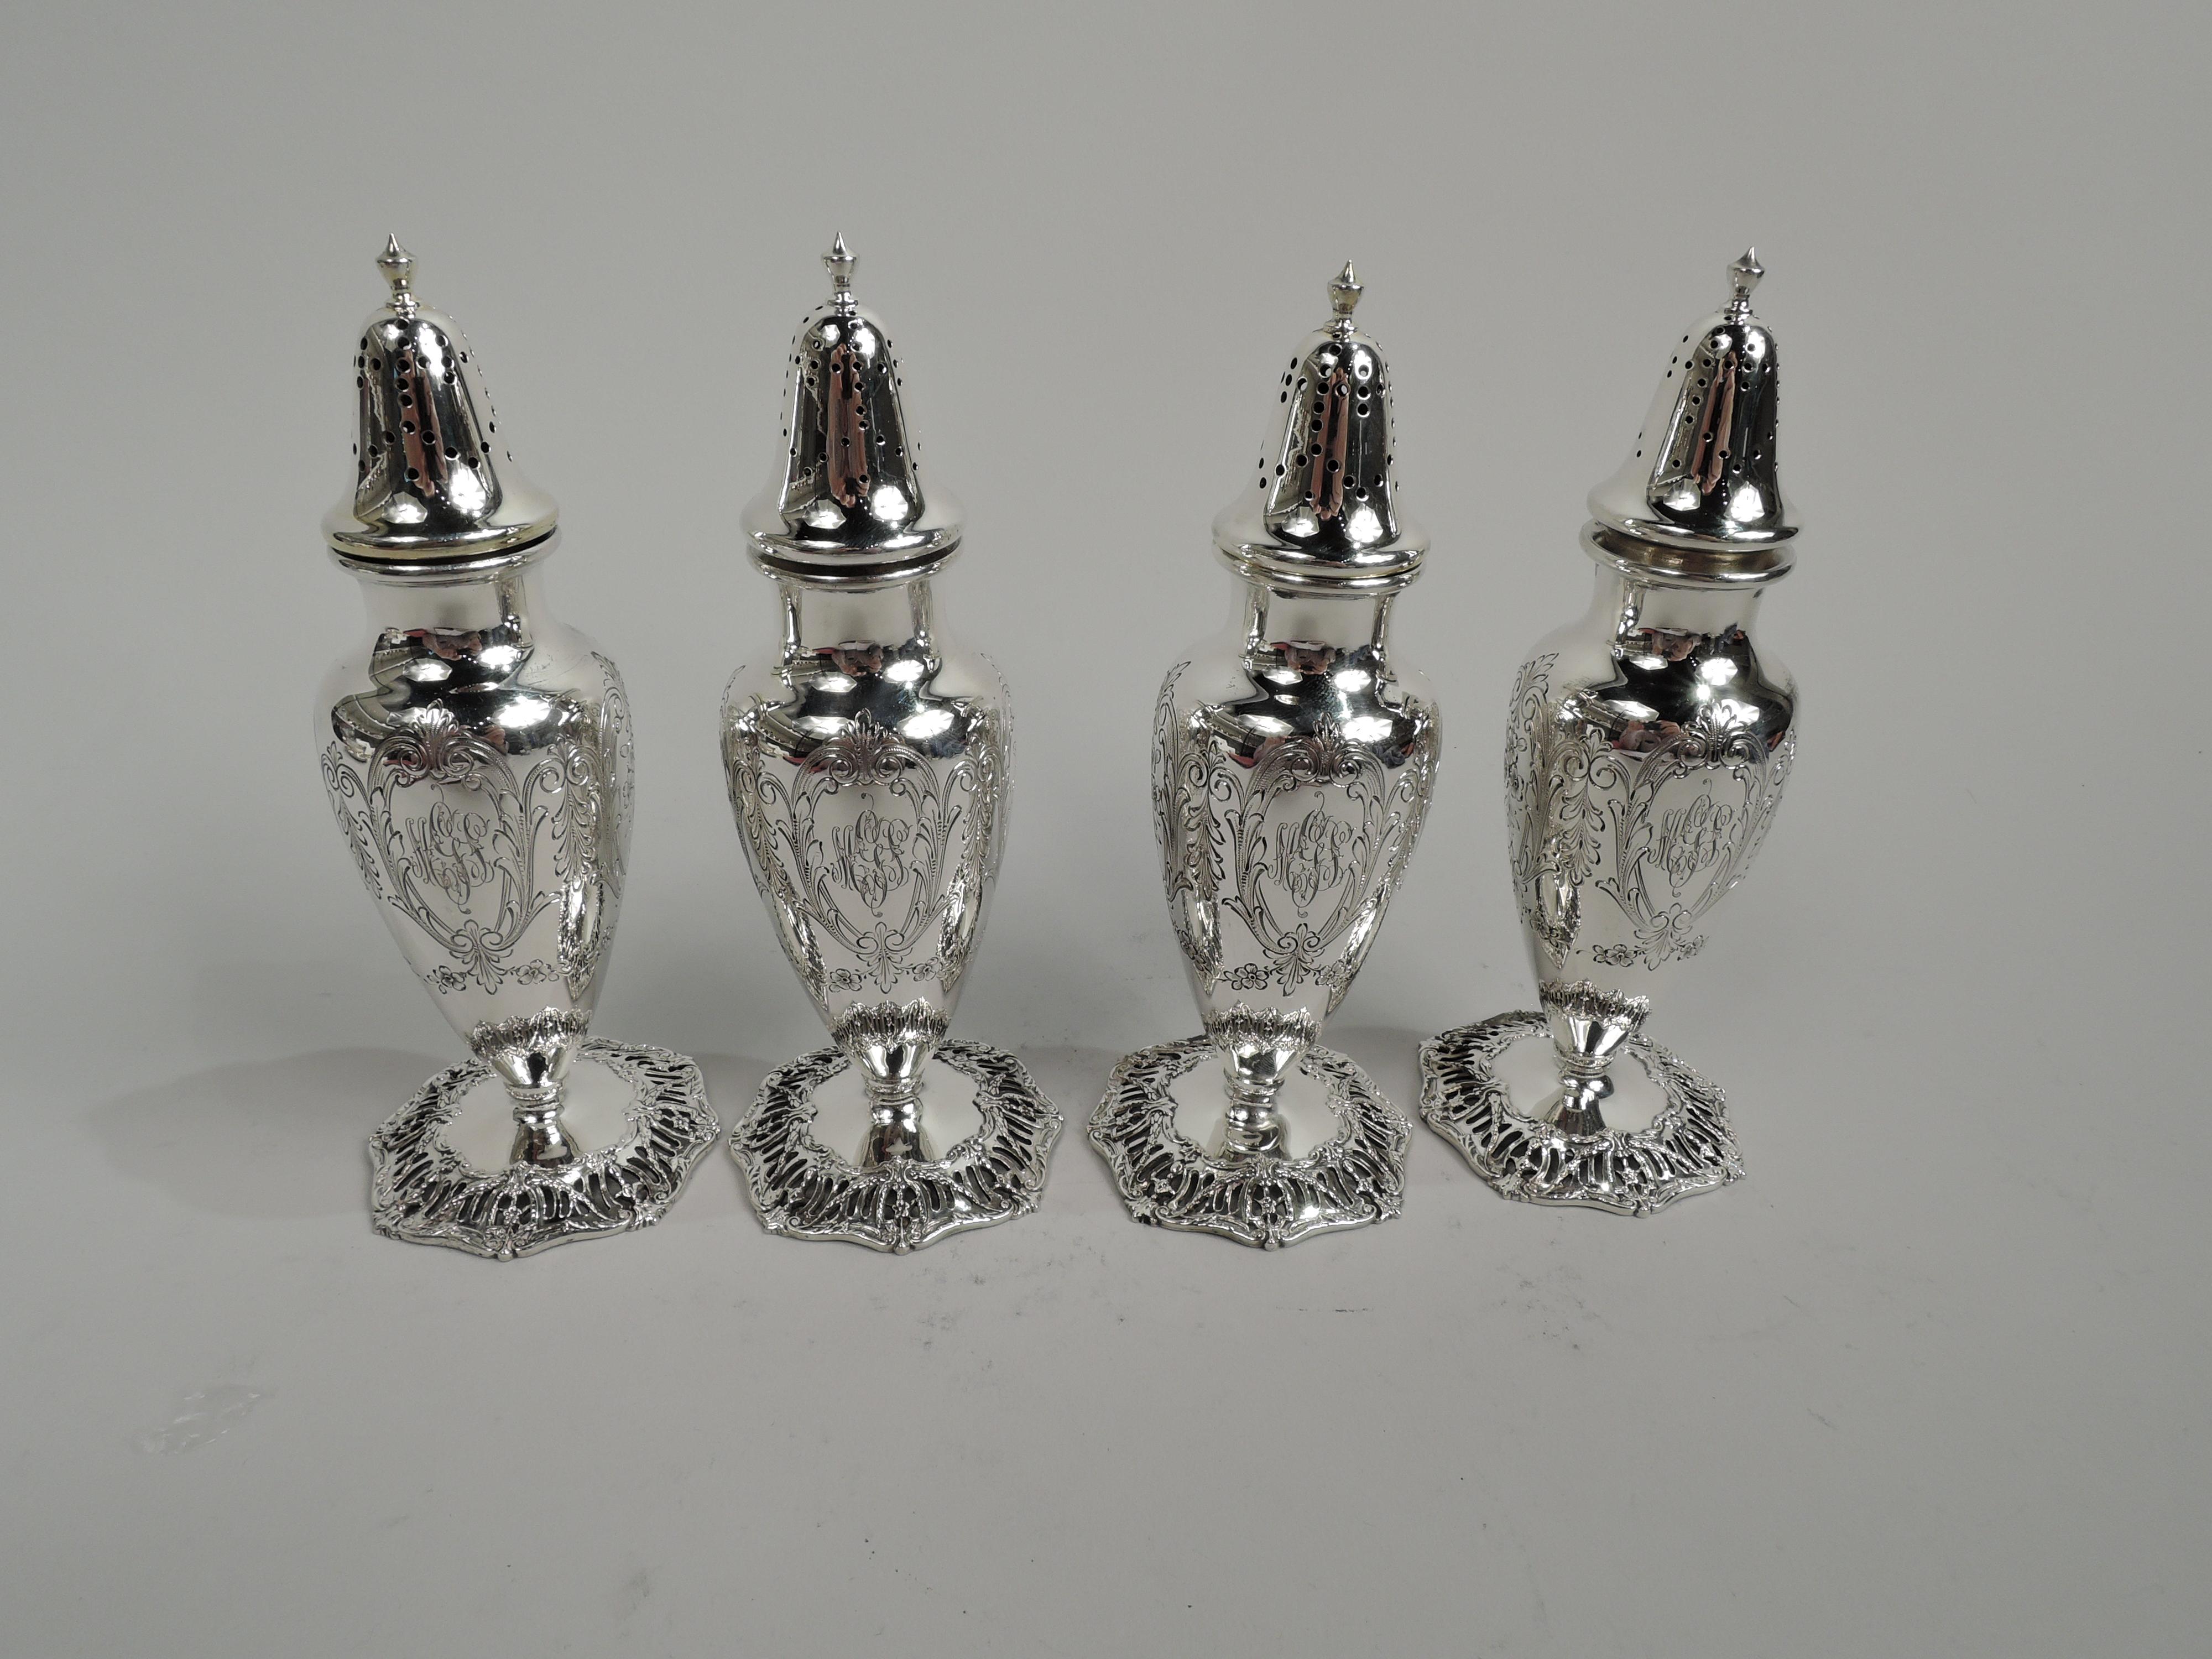 Two pairs of Edwardian Regency sterling silver salt & pepper shakers. Made by Graff, Washbourne & Dunn in New York, ca 1909. Each: Ovoid body with engraved scrolled frames inset with flowers and leaves. One frame engraved with interlaced script